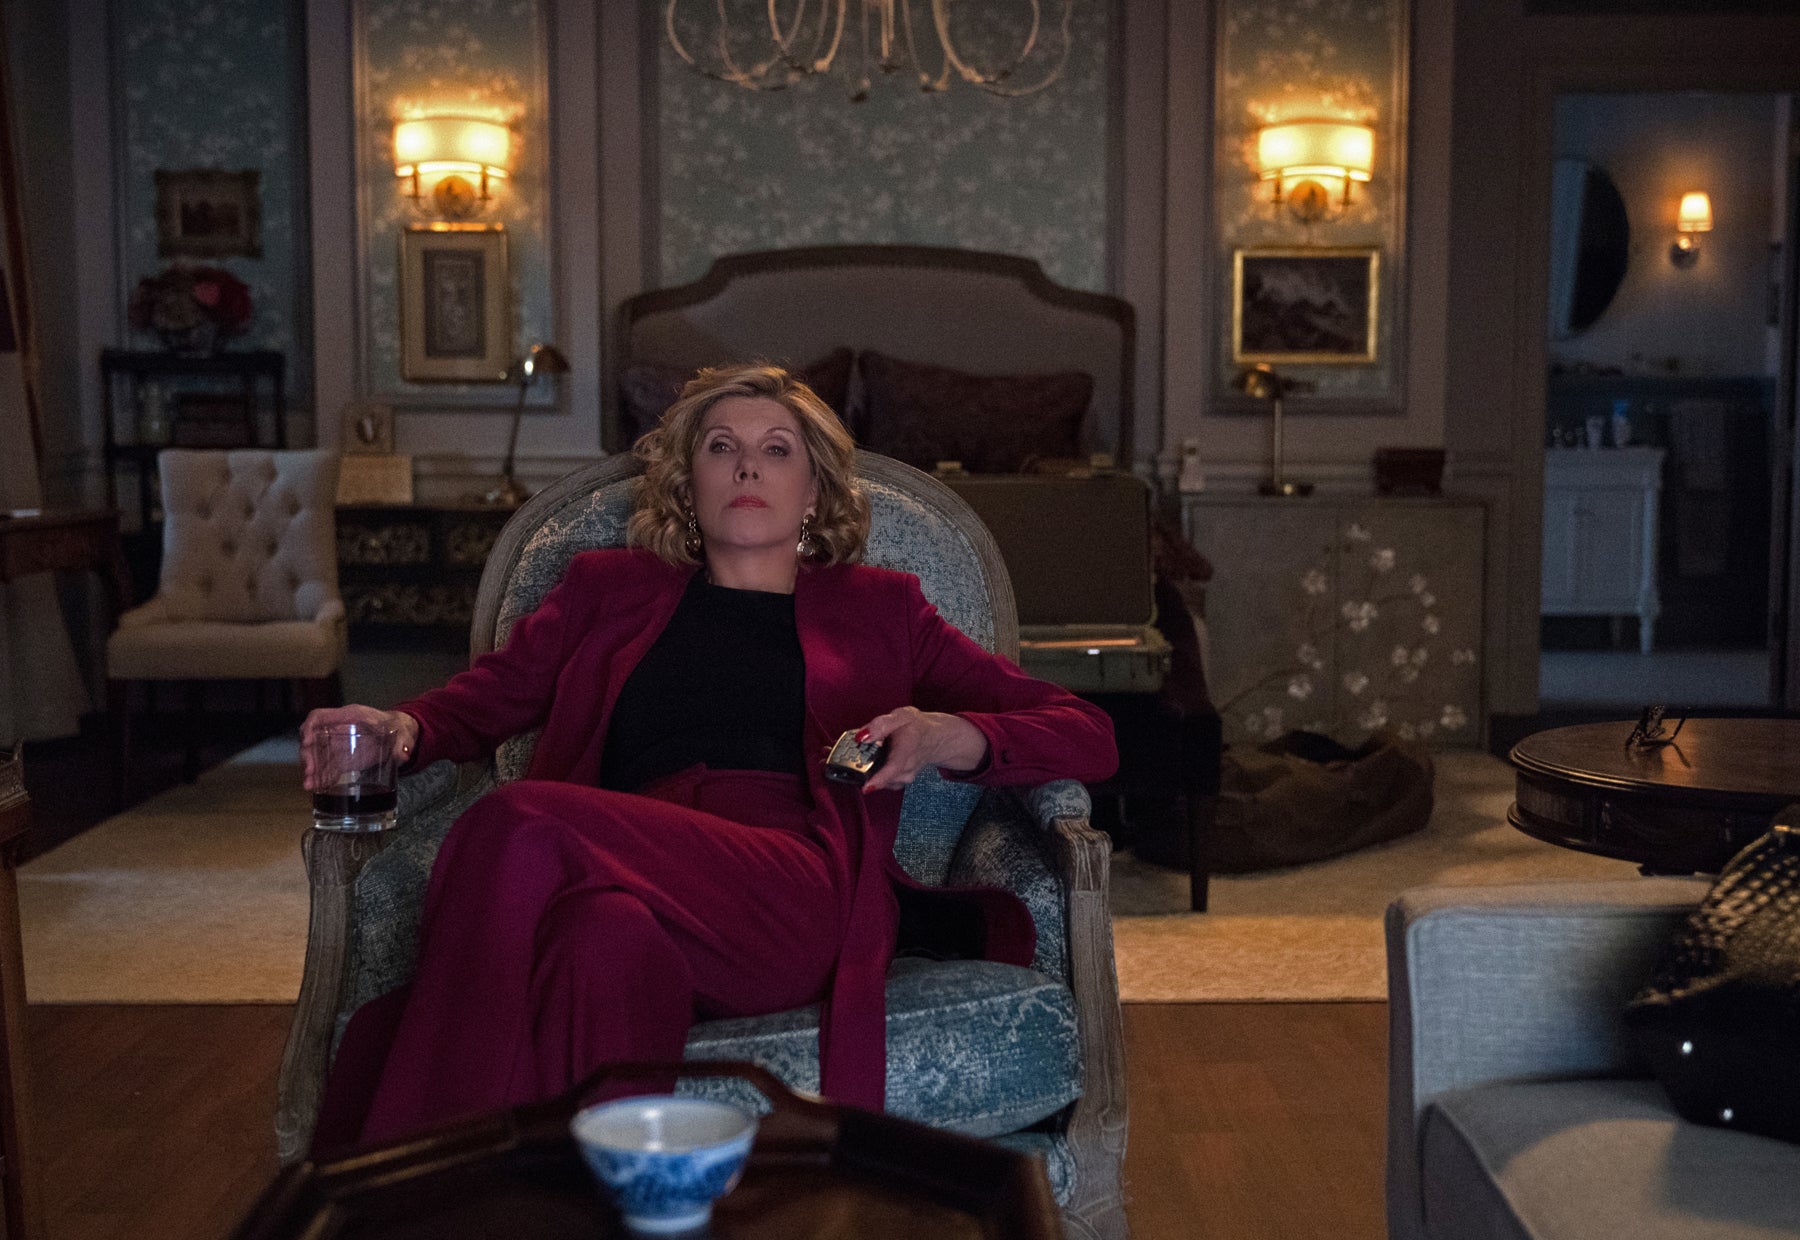 Diane sits slumped in a chair in her bedroom with a glass of liquor in one hand and the remote in the other. She looks tired, as if she has just had a long day.